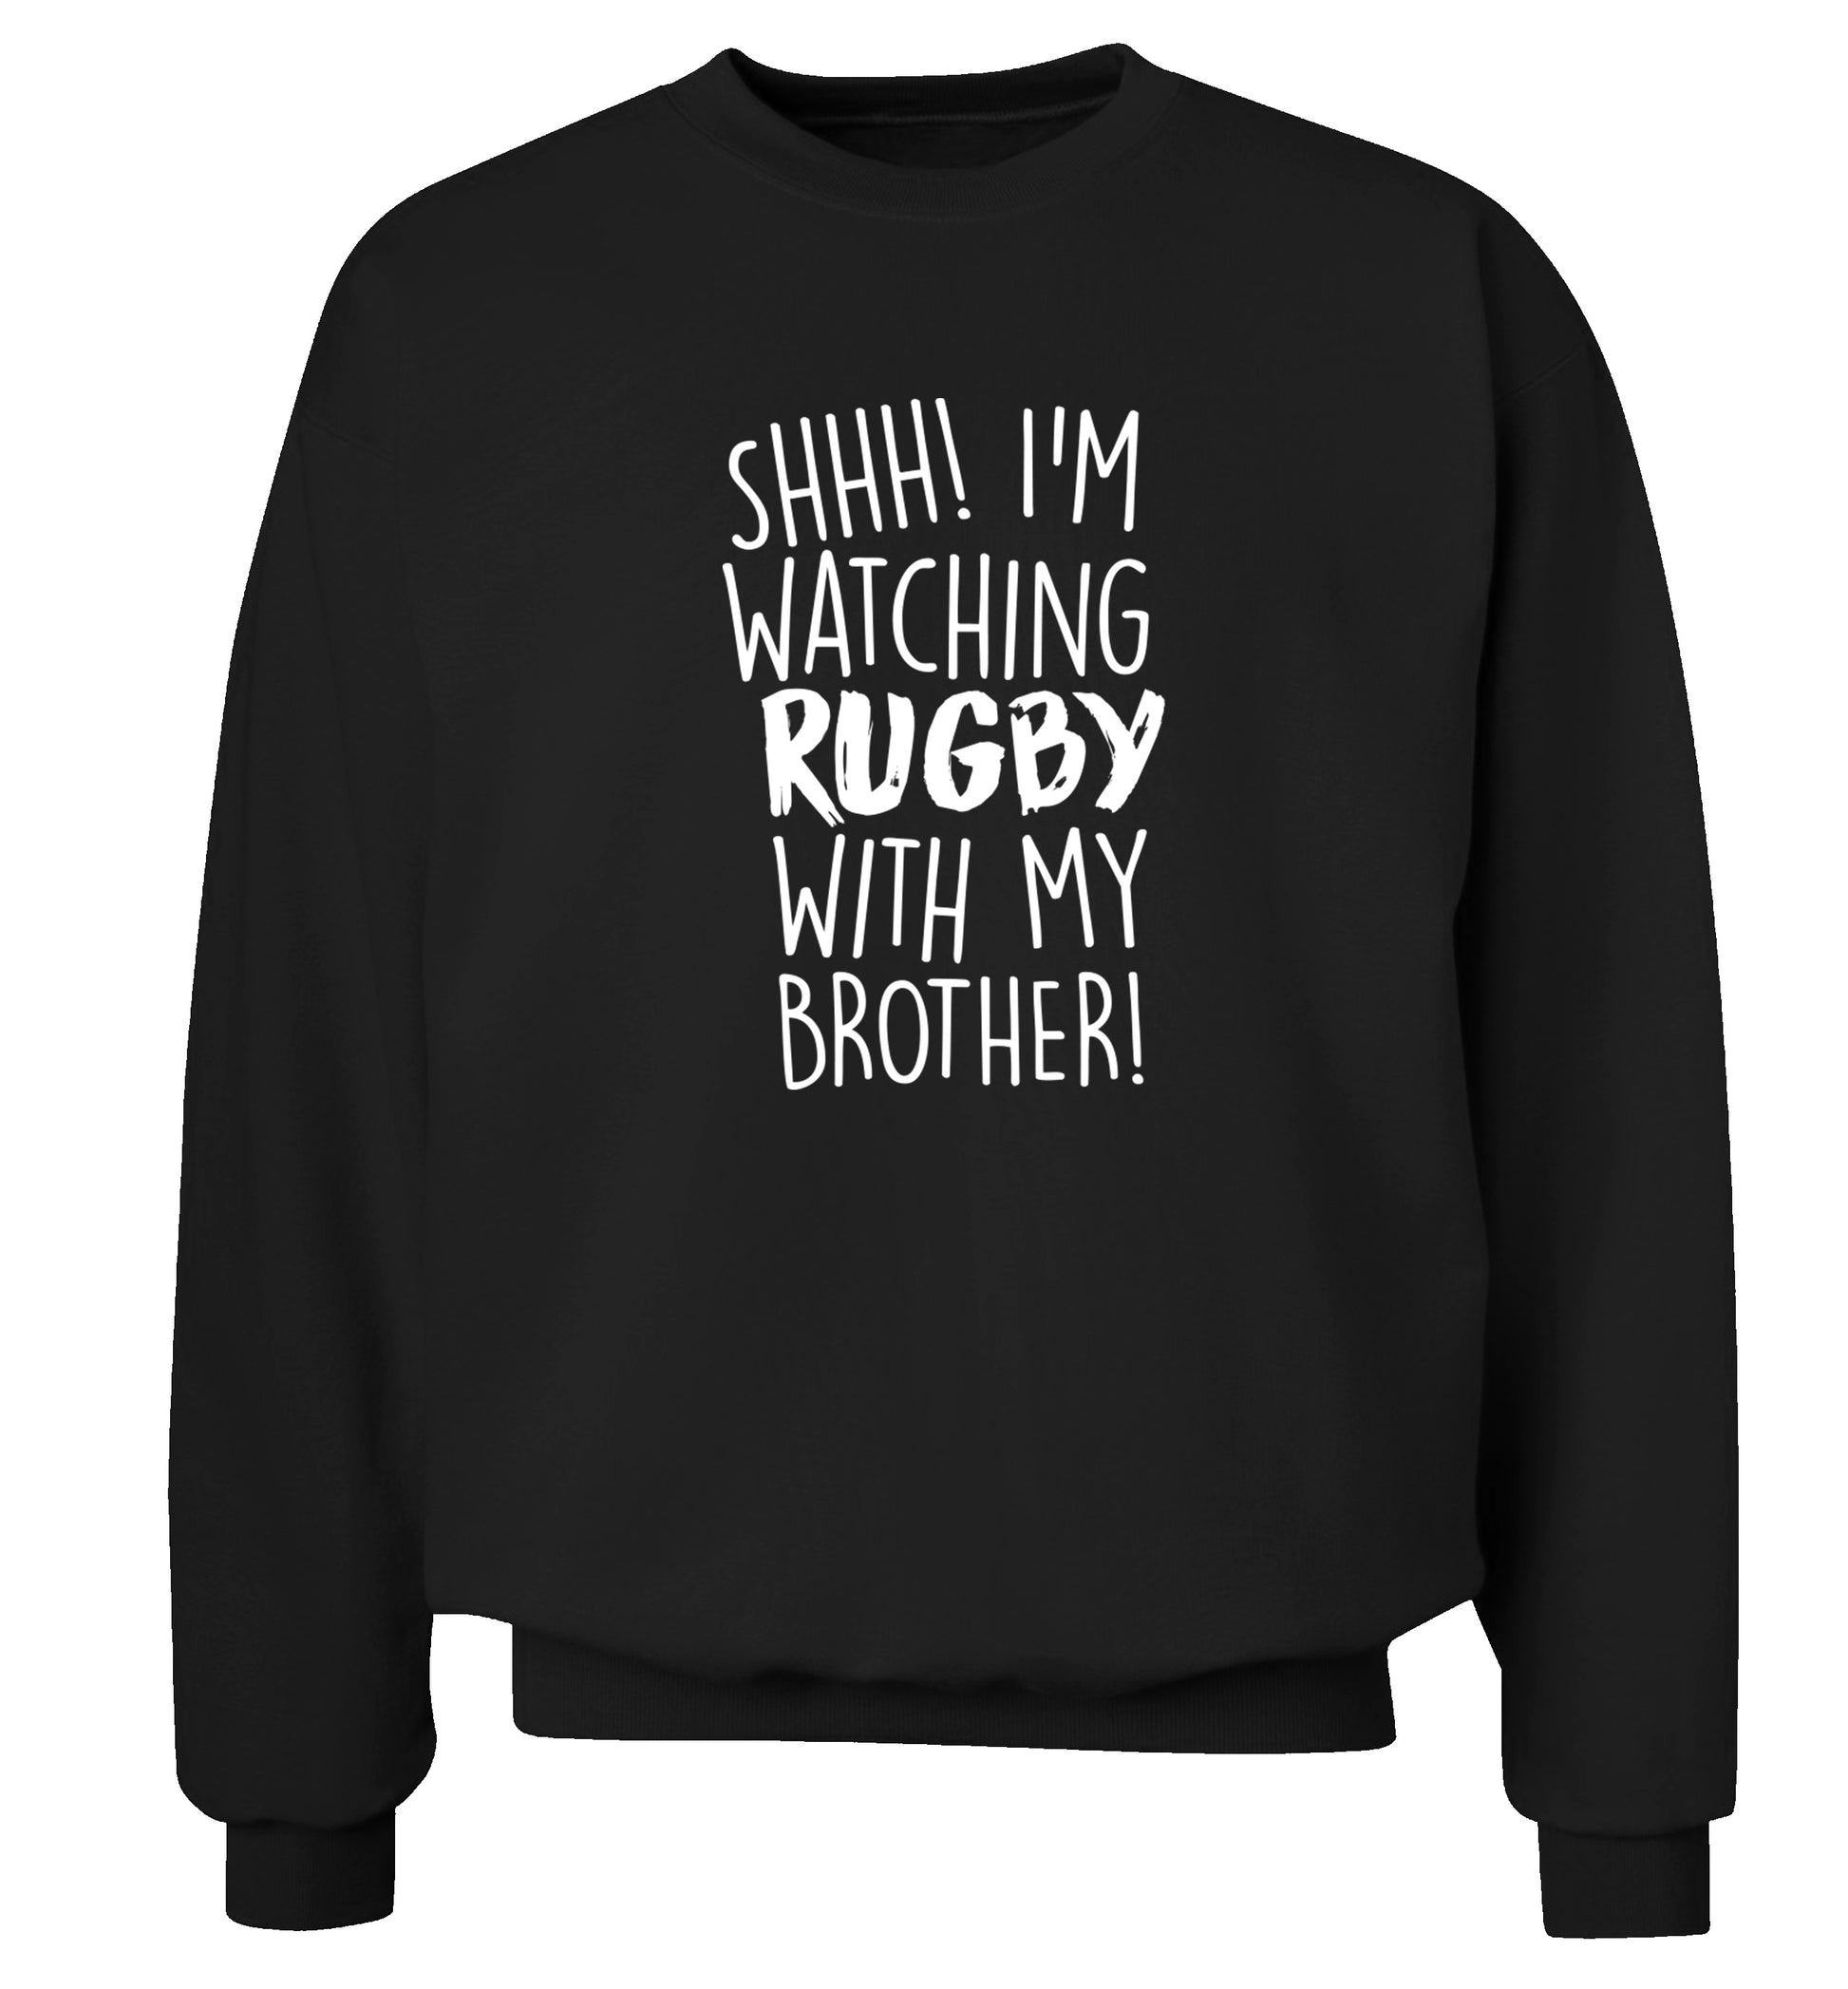 Shh... I'm watching rugby with my brother Adult's unisex black Sweater 2XL